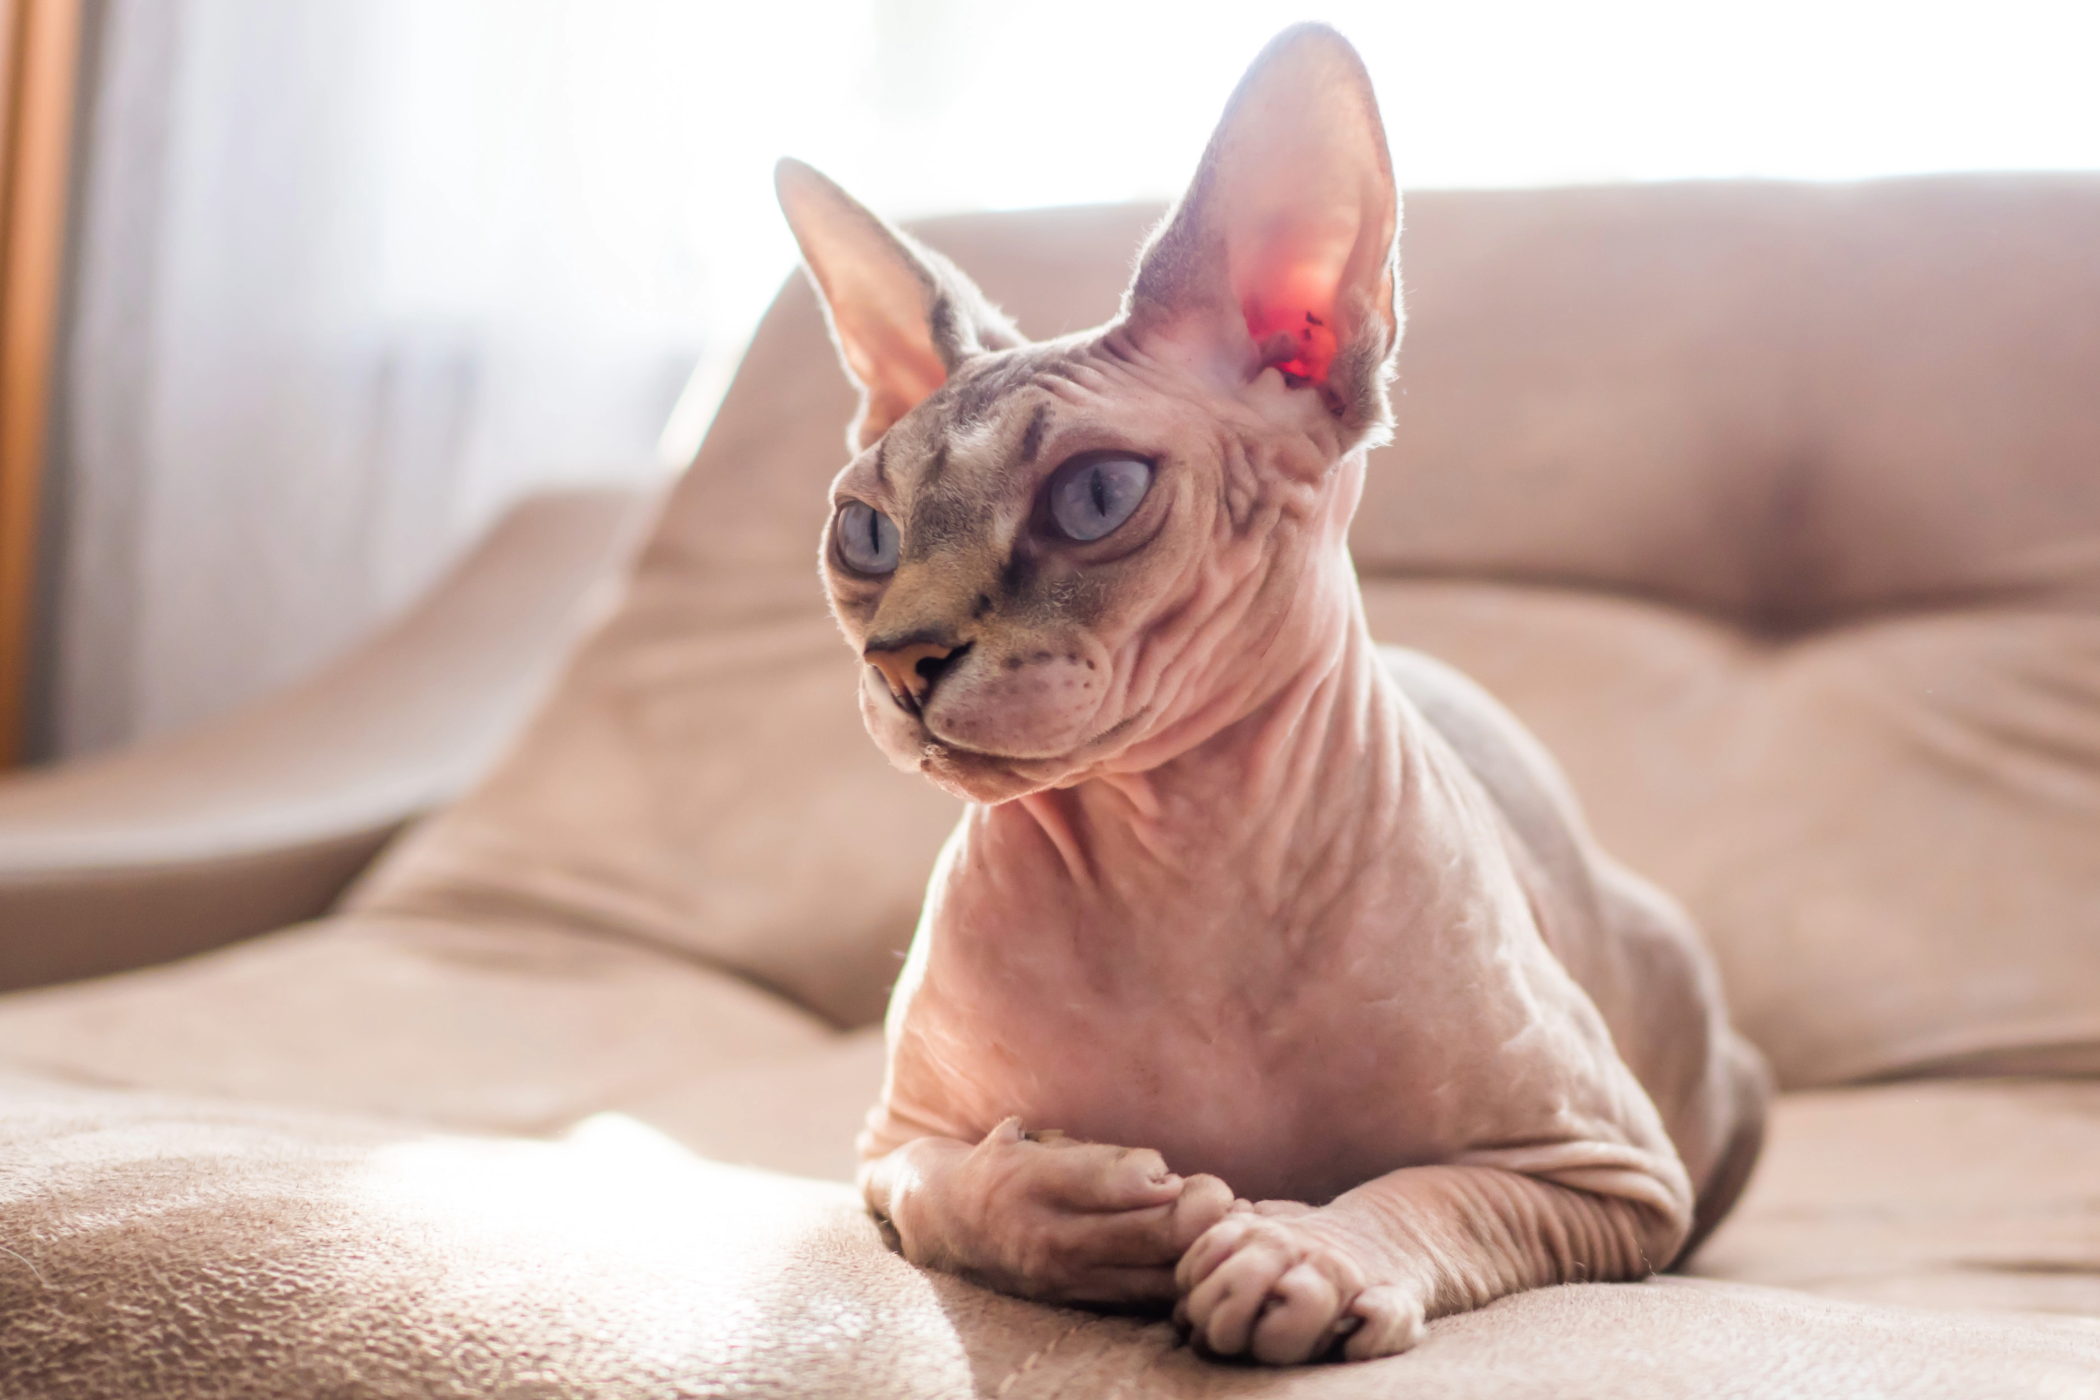 A sphinx cat sitting on a chair.